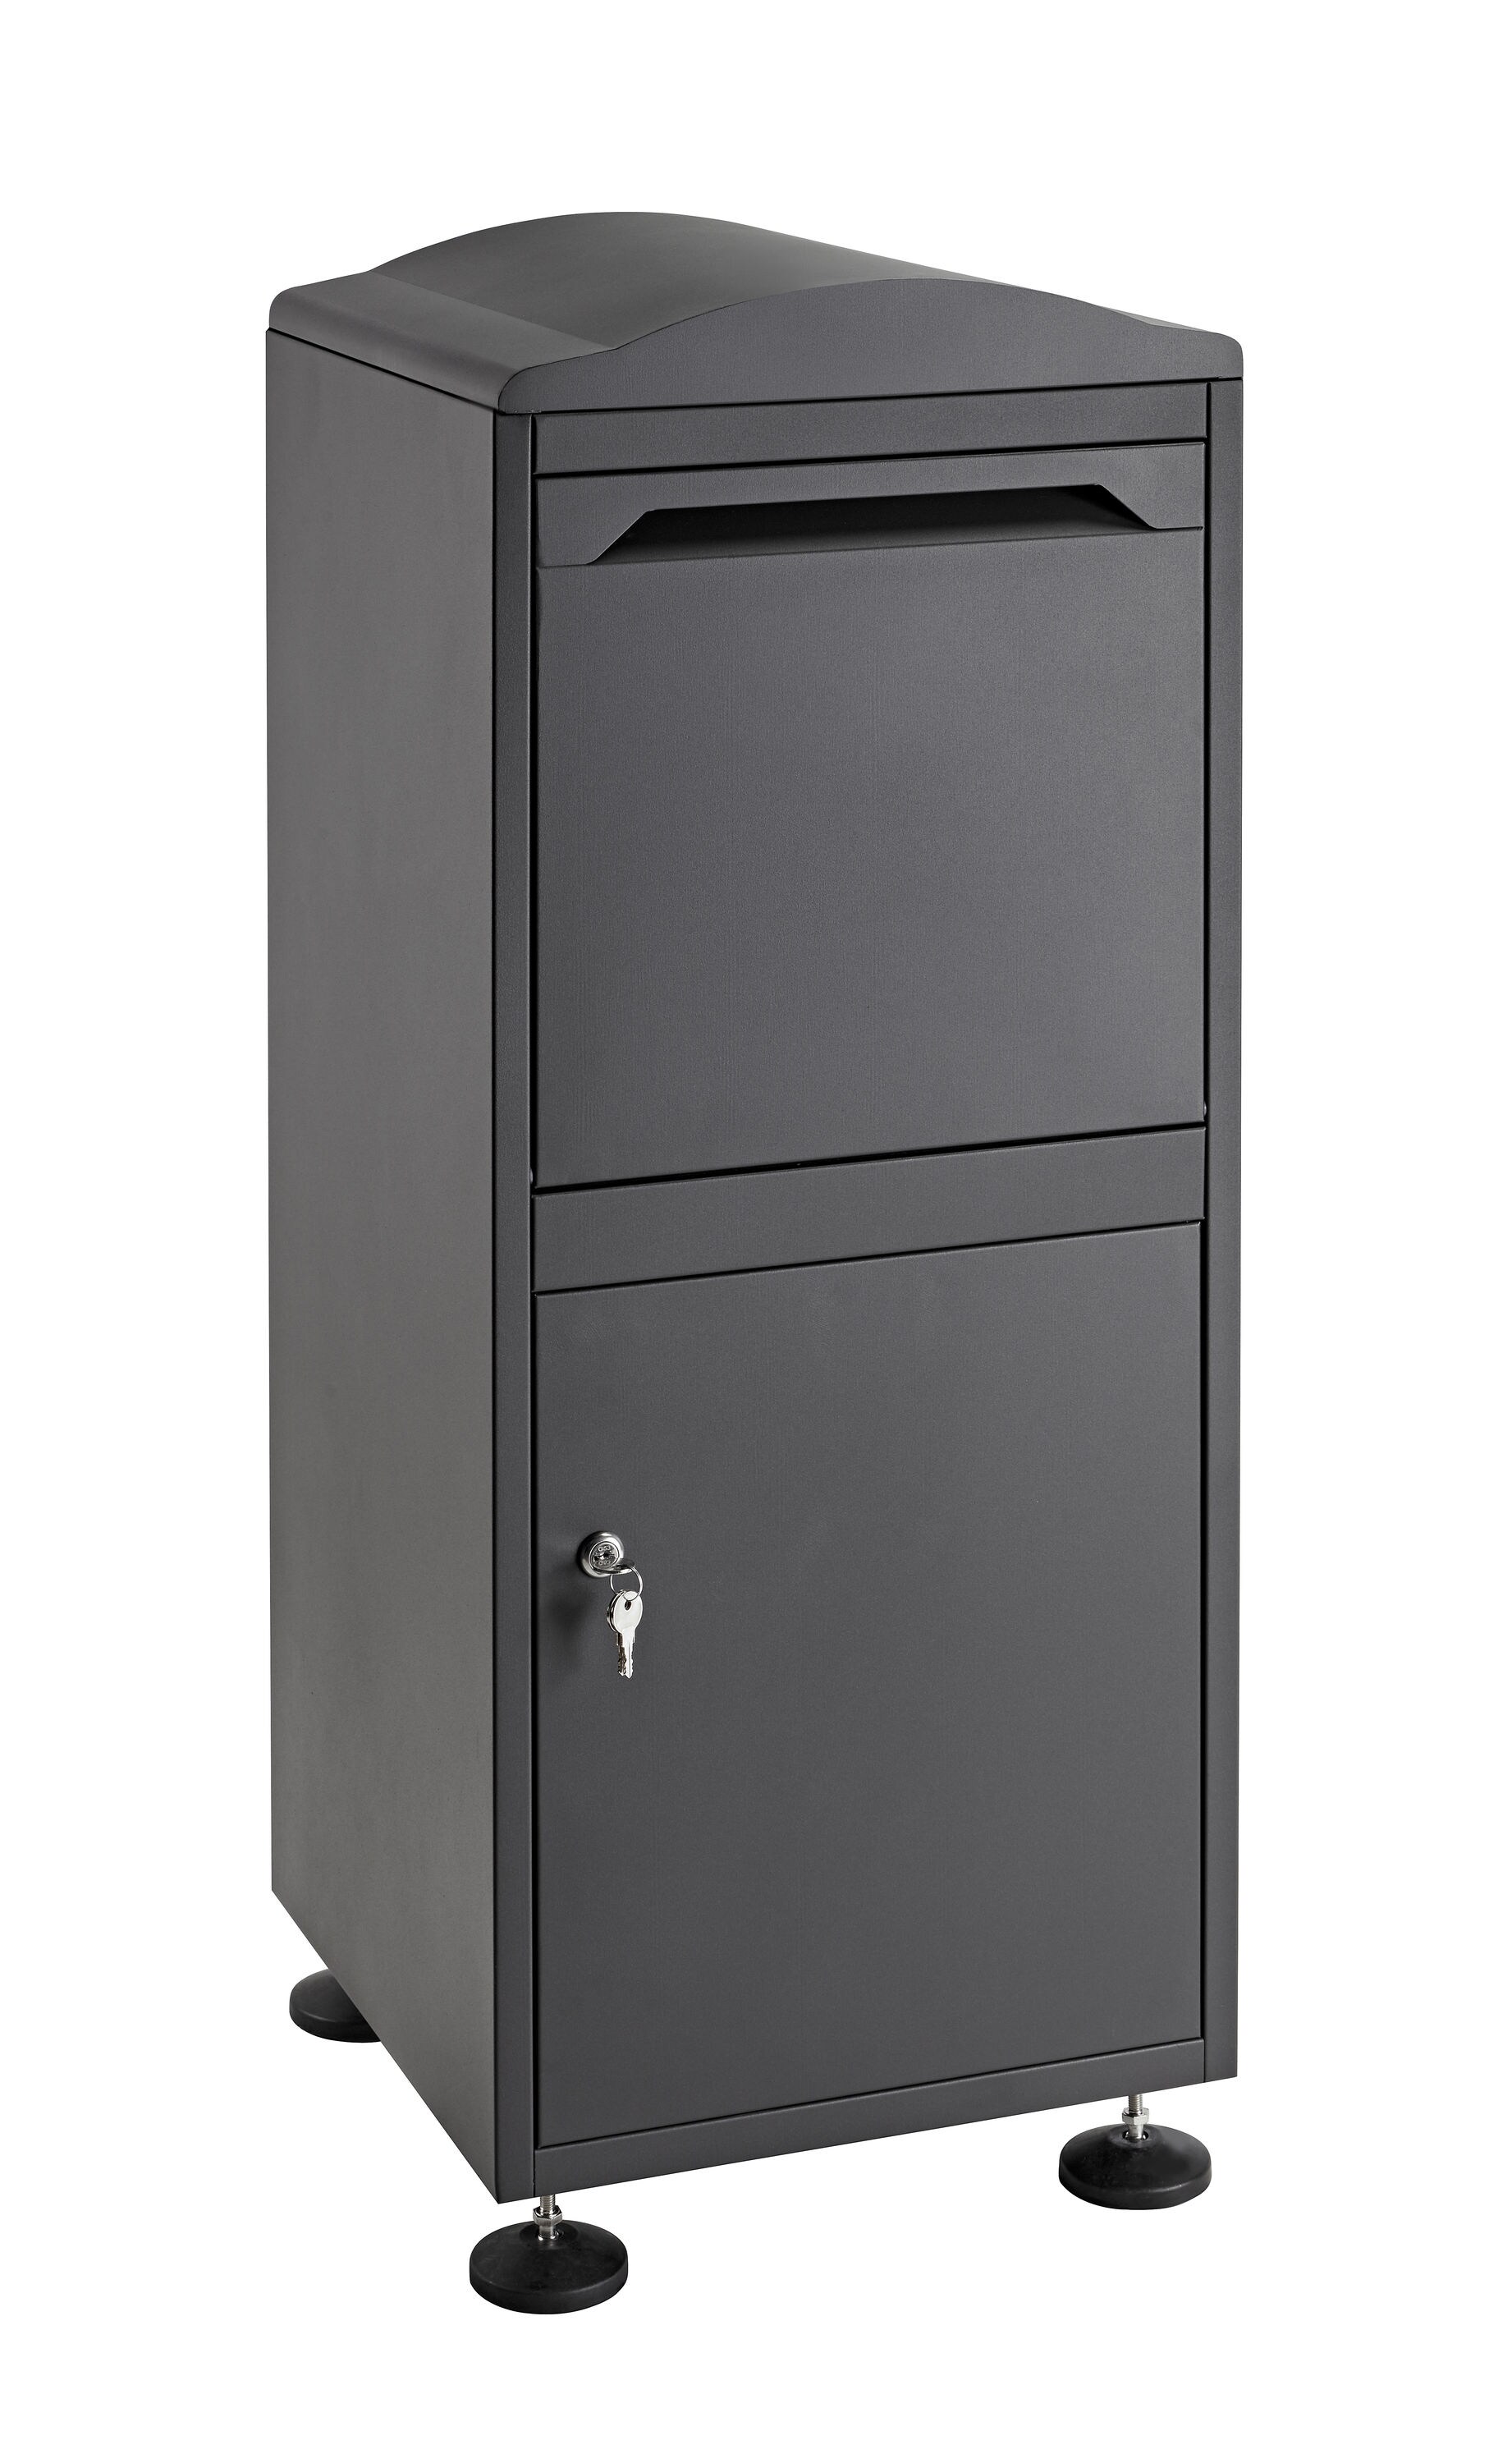 Details about   AdirOffice Black Coated Steel Outdoor Business Key Storage Mailbox Drop Box 